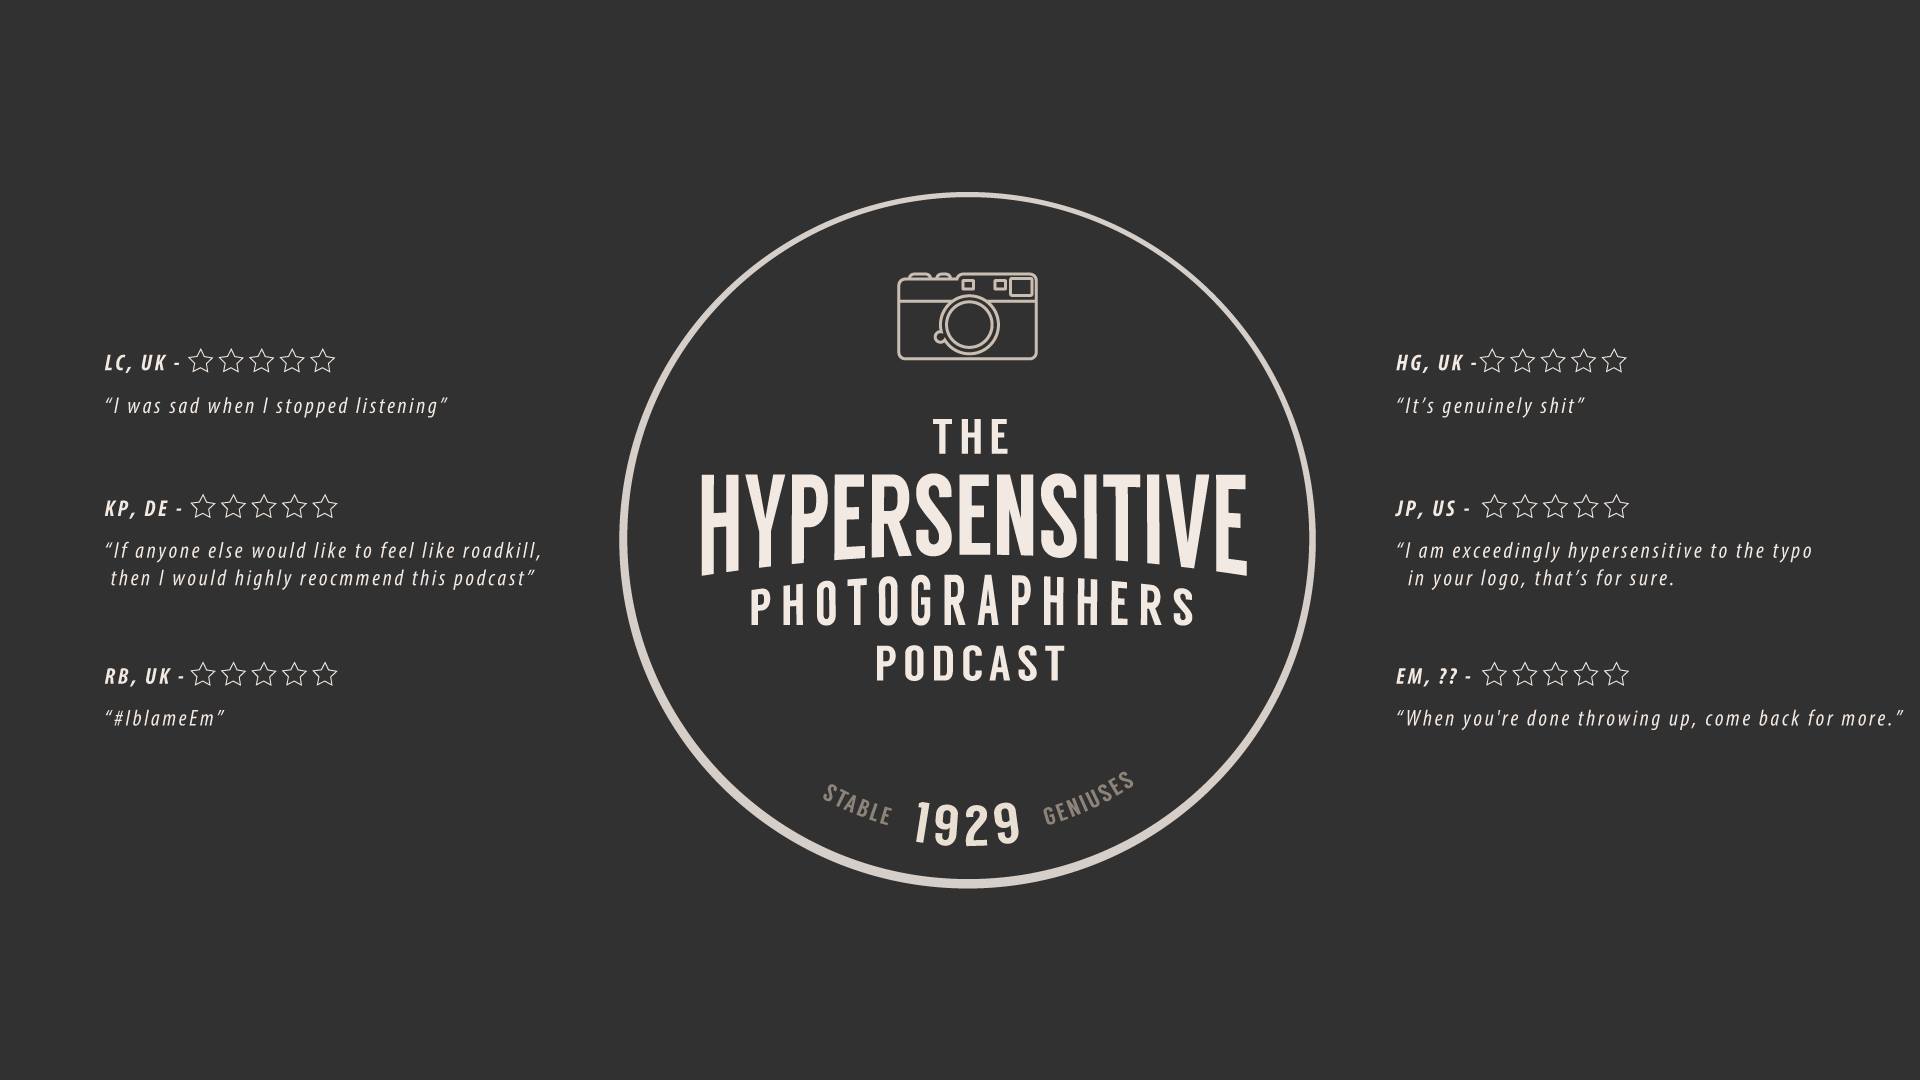 The Hypersensitive Photographers Podcast